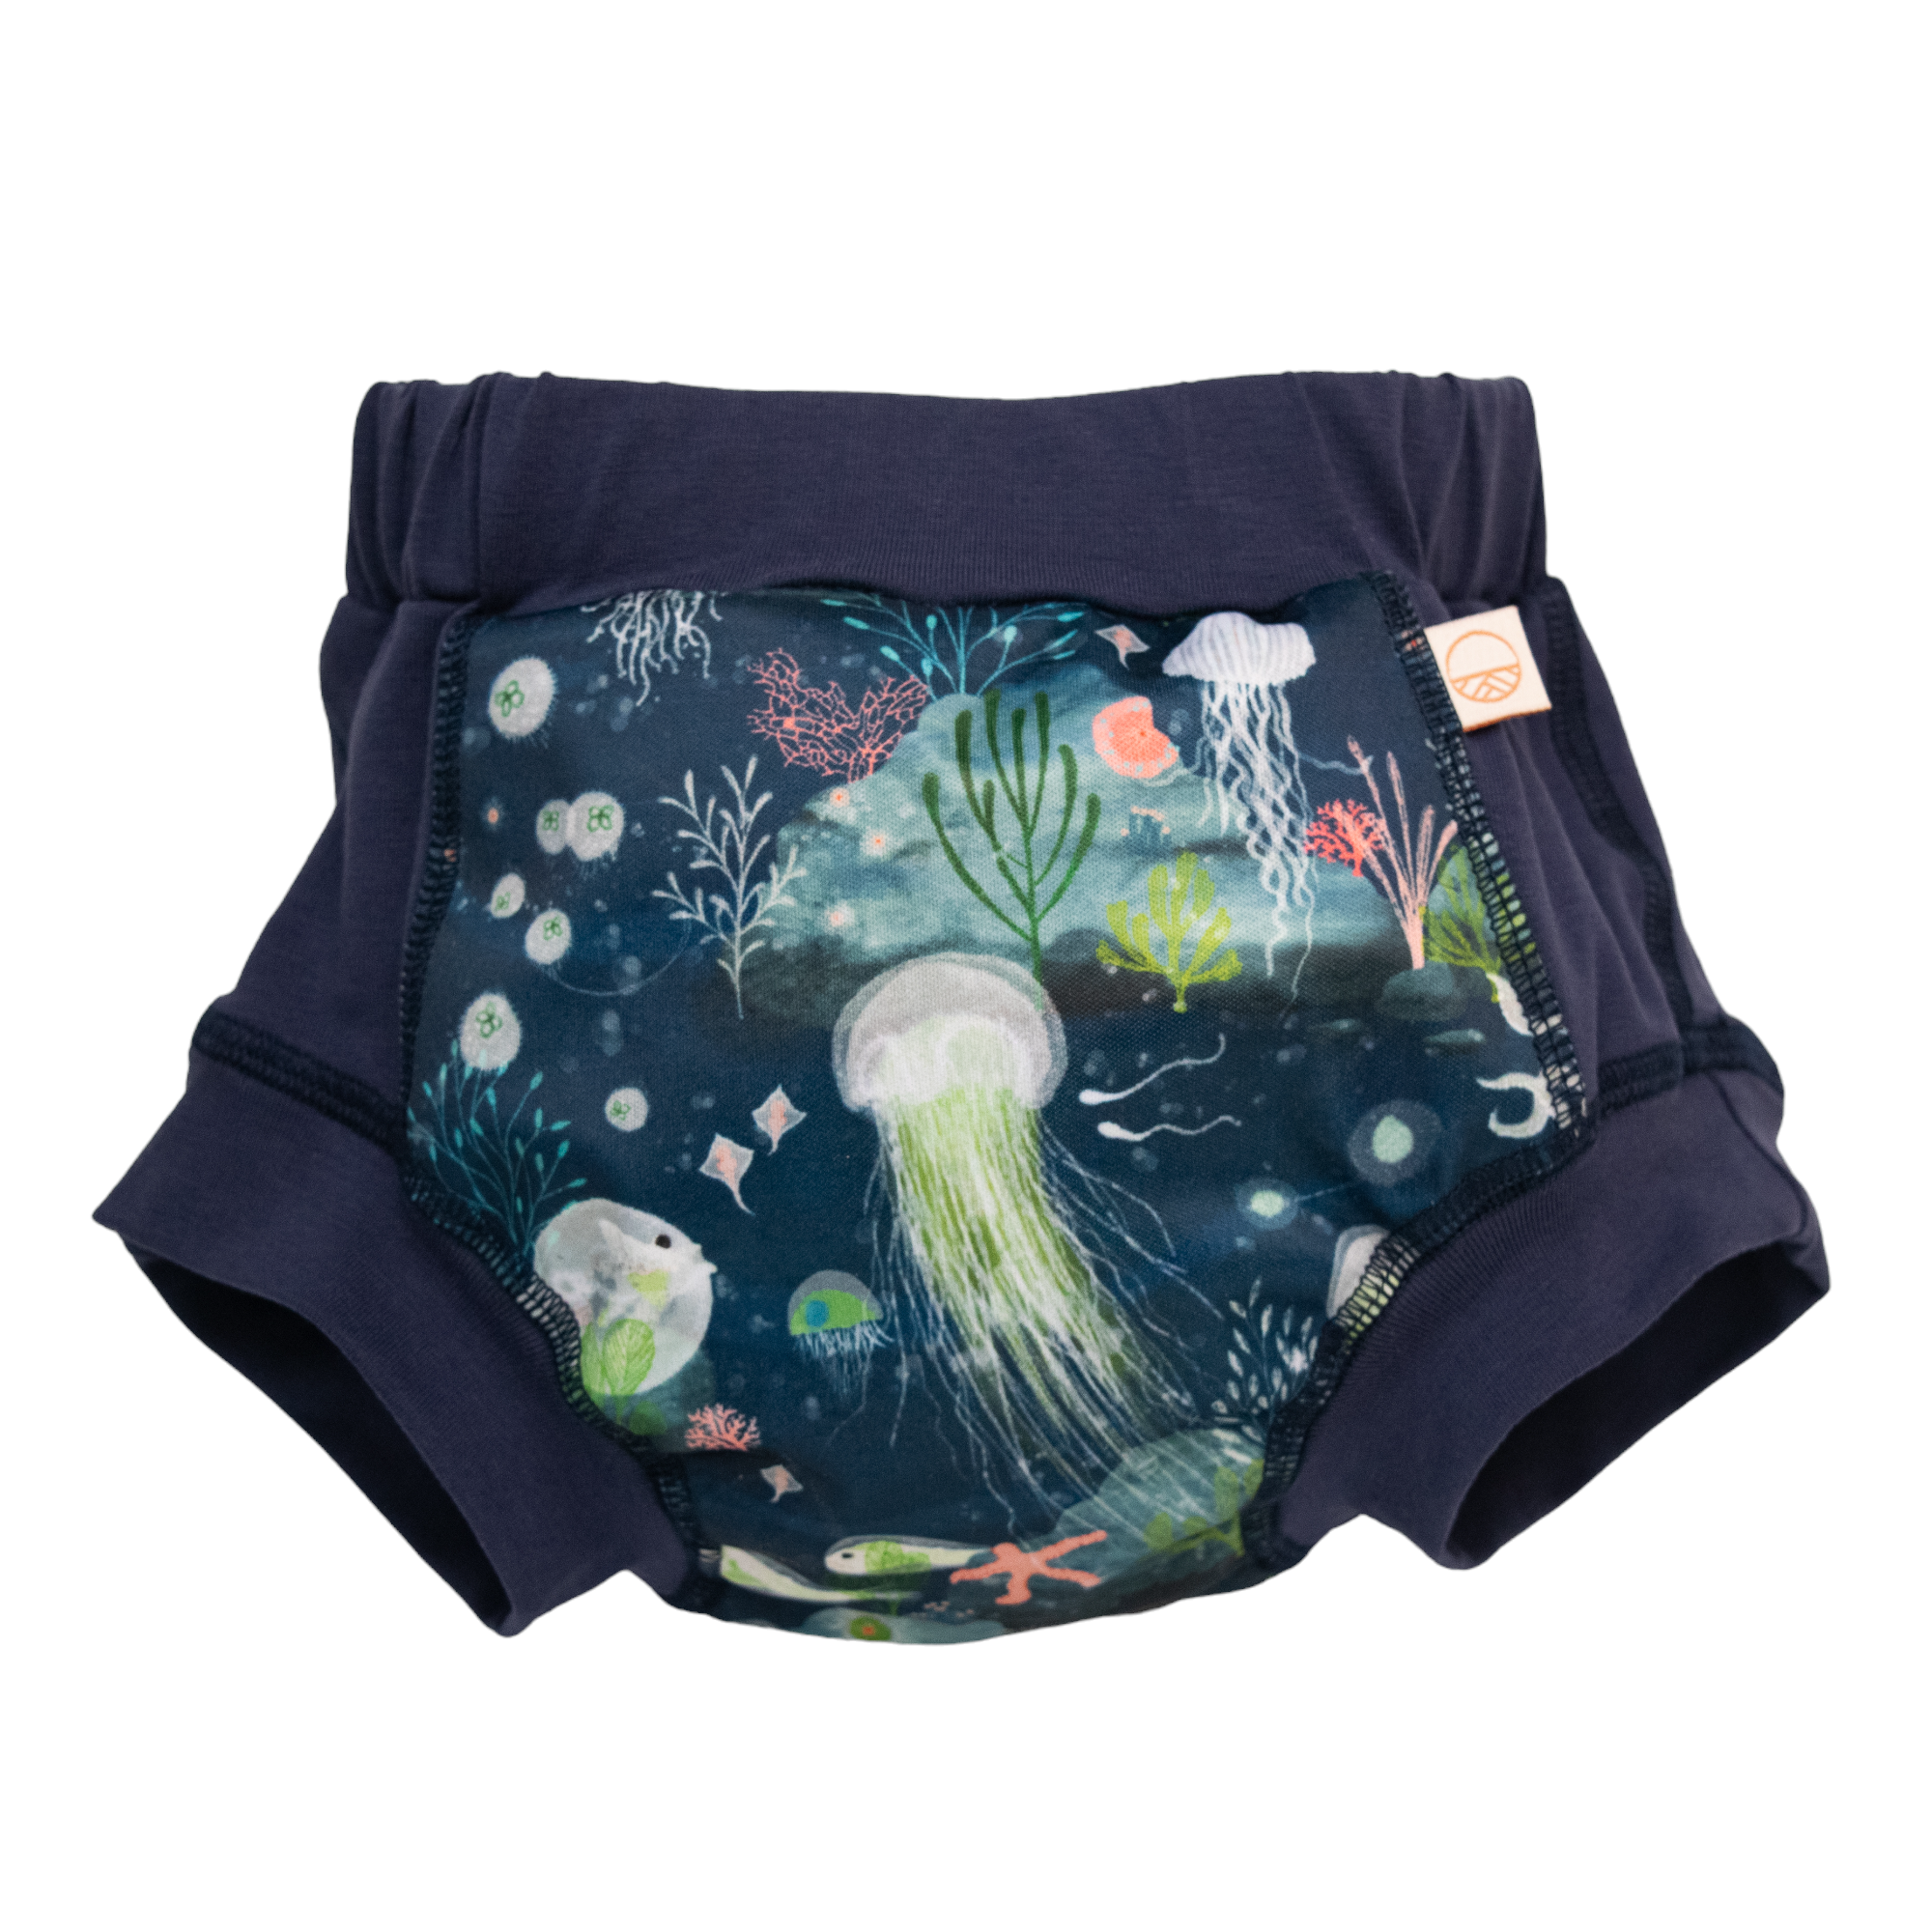 Wee Pants Training Undies - Katherine Quinn Collection